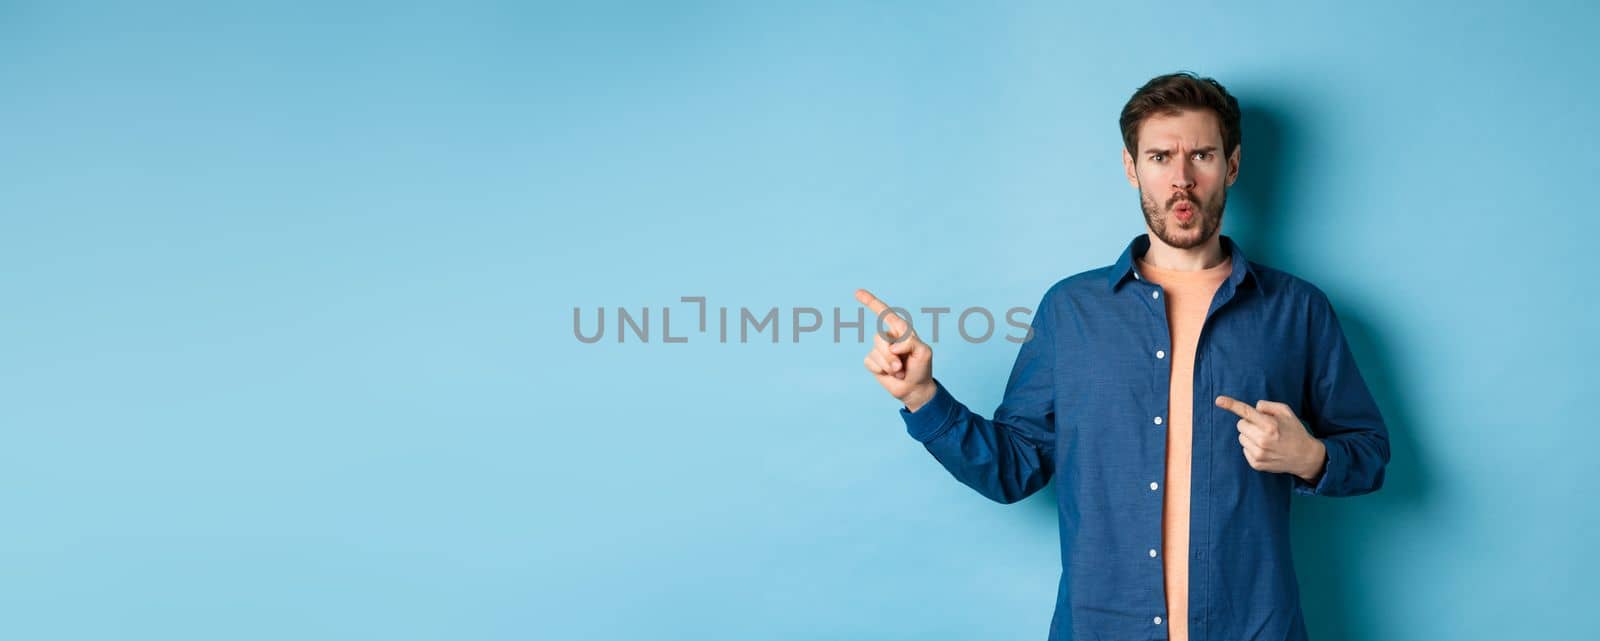 Shocked and offended young man frowning and looking hurt, pointing fingers left at empty space, complaining on something, standing on blue background.